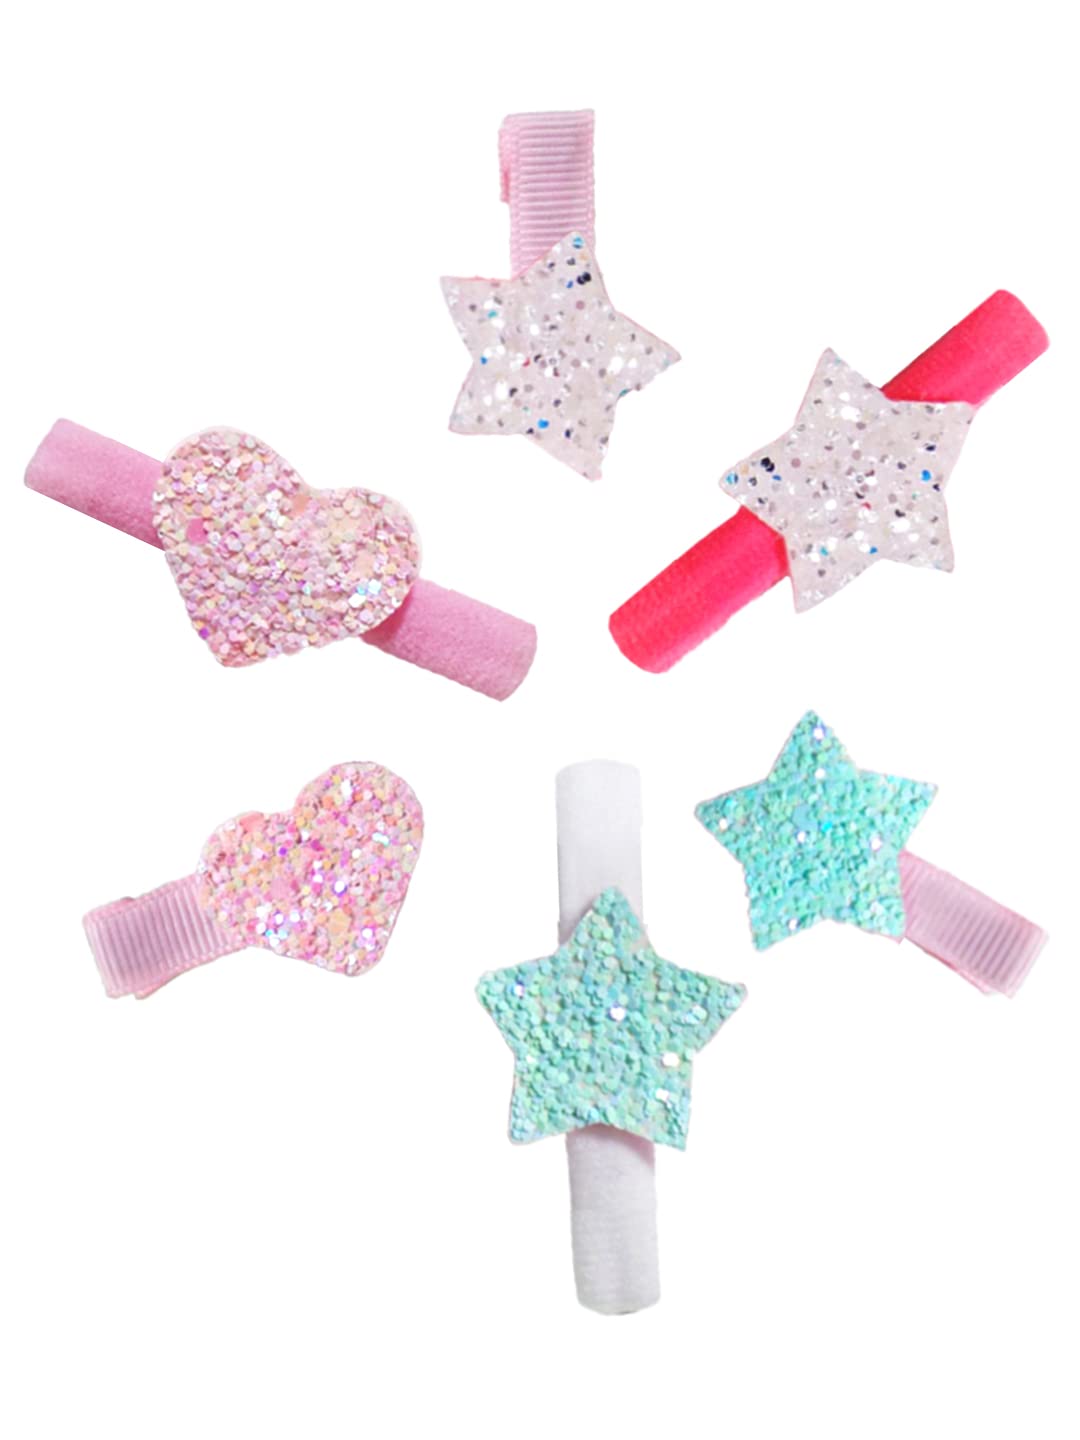 Melbees by Yellow Chimes 6 pcs Hair Clips Hair Band for Kids with Glittering Star Heart Charms Hair Accessories Pretty Snap Hairpins Hair Ties for Kids Girls (Pack of 6), Multi-Color, Medium (YCHACLRB-KD004-MC)